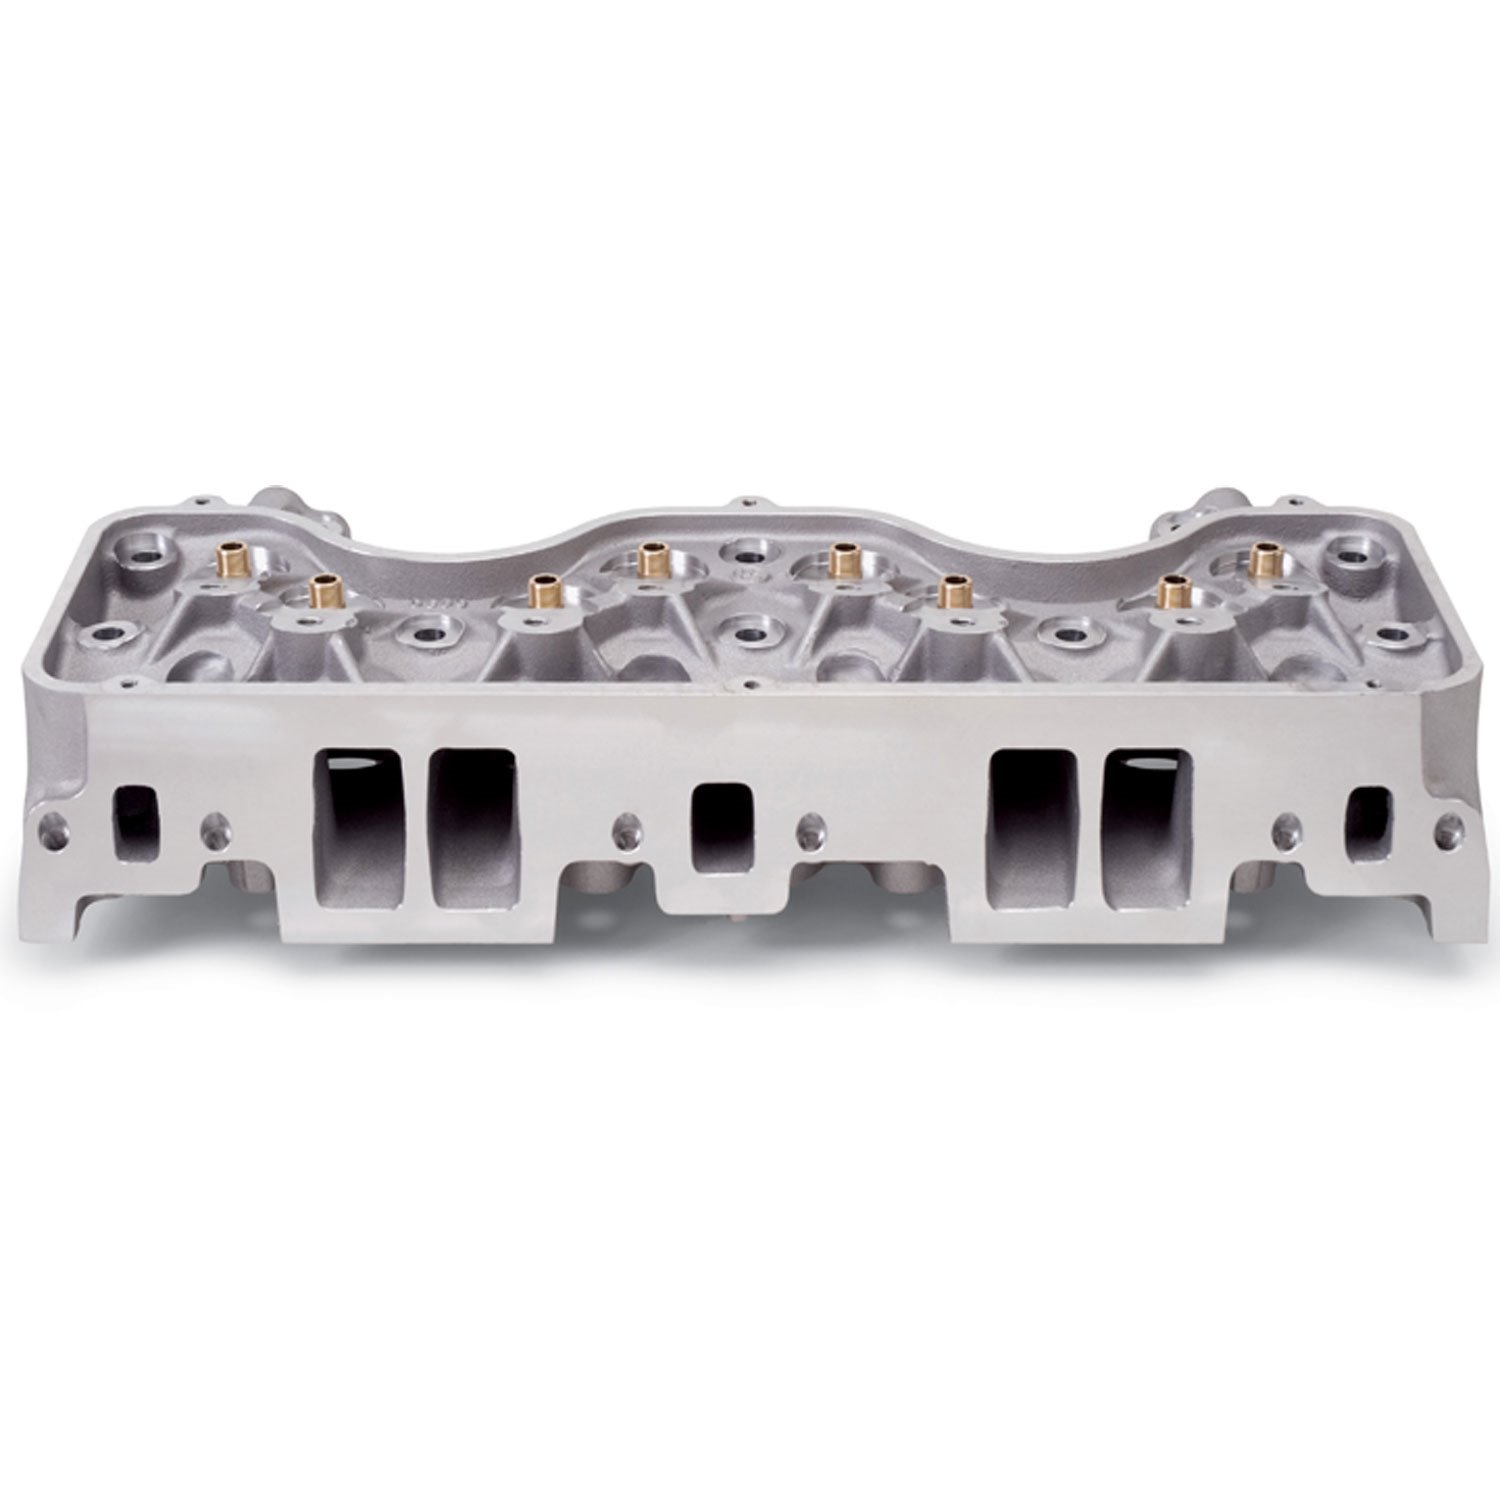 Performer RPM Chevy W-Series 348/409 Cylinder Heads